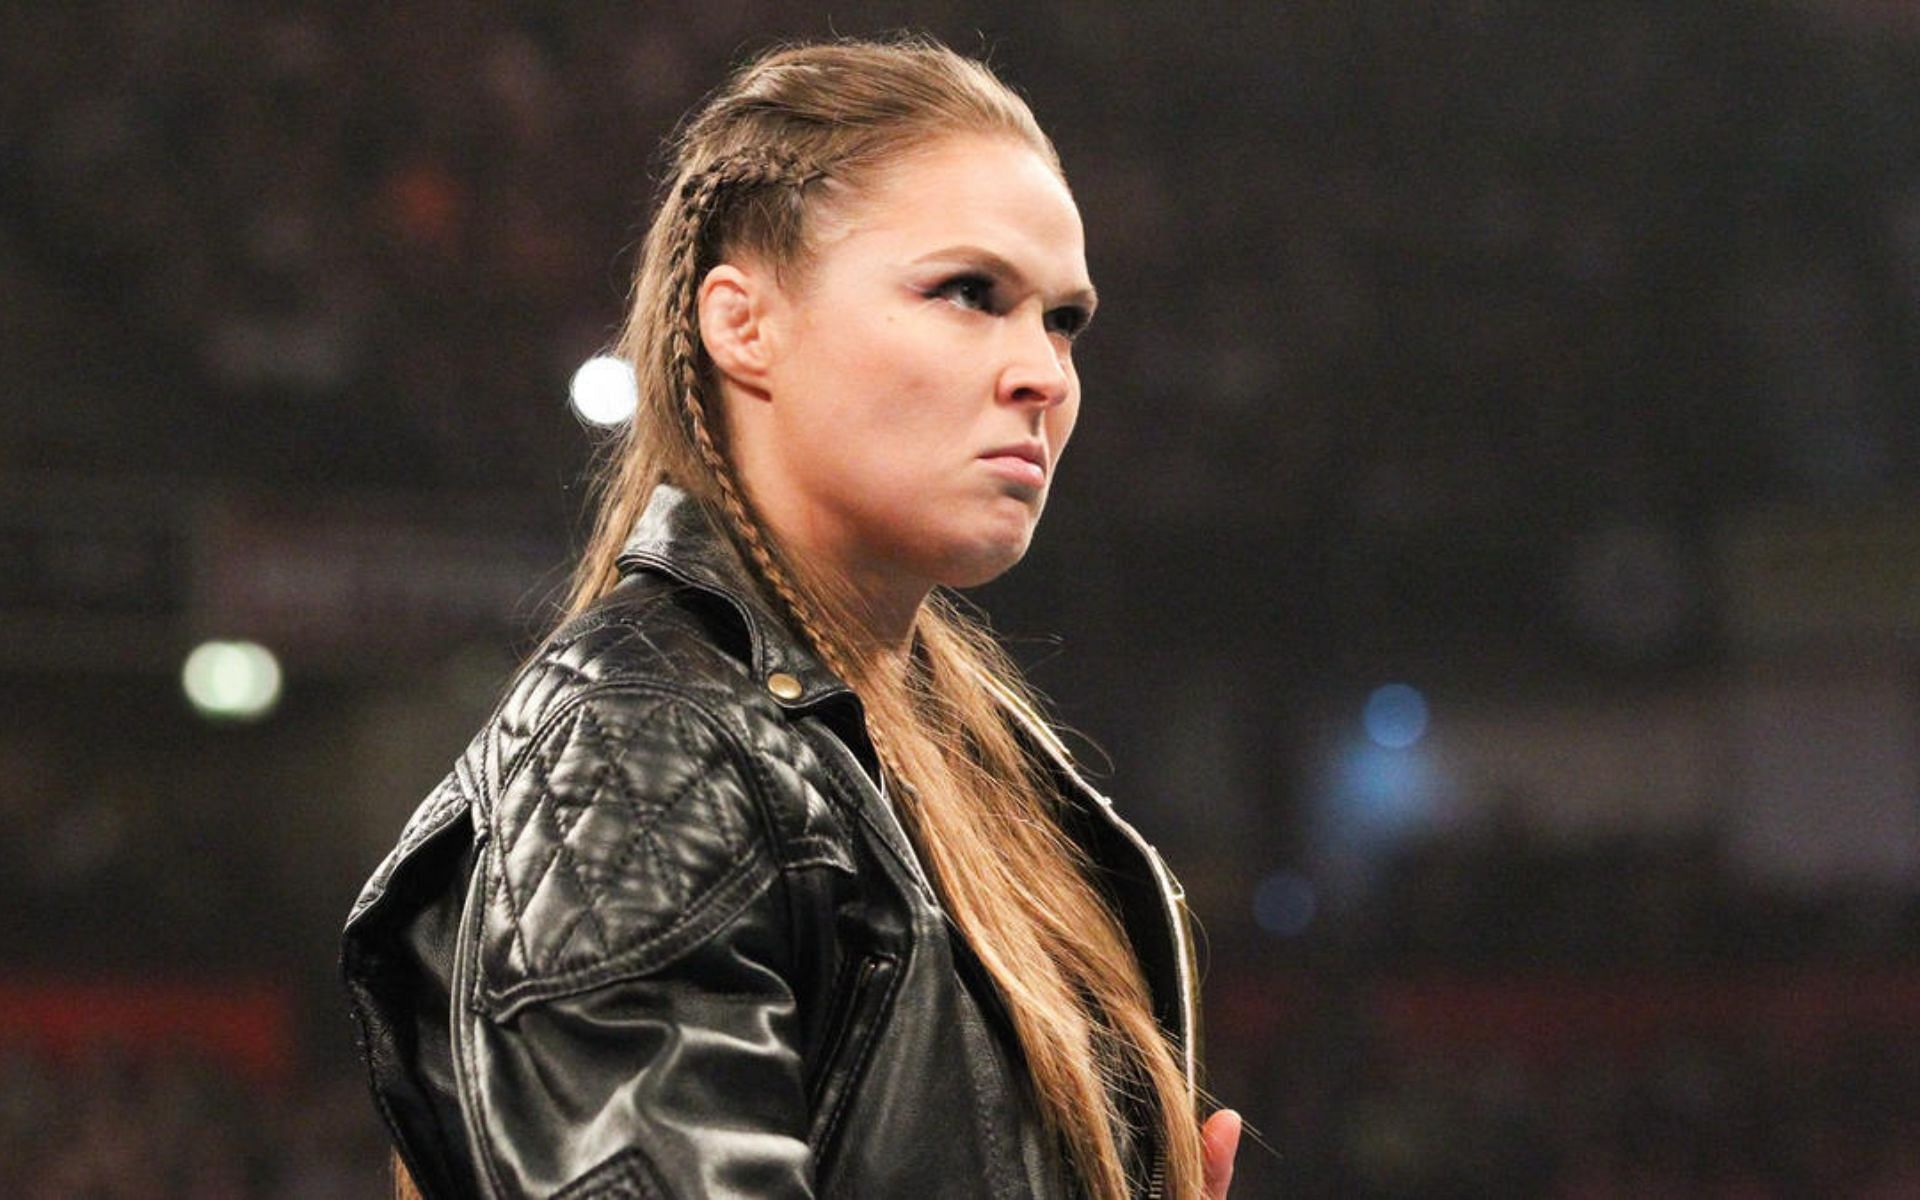 Ronda Rousey is a former RAW Women